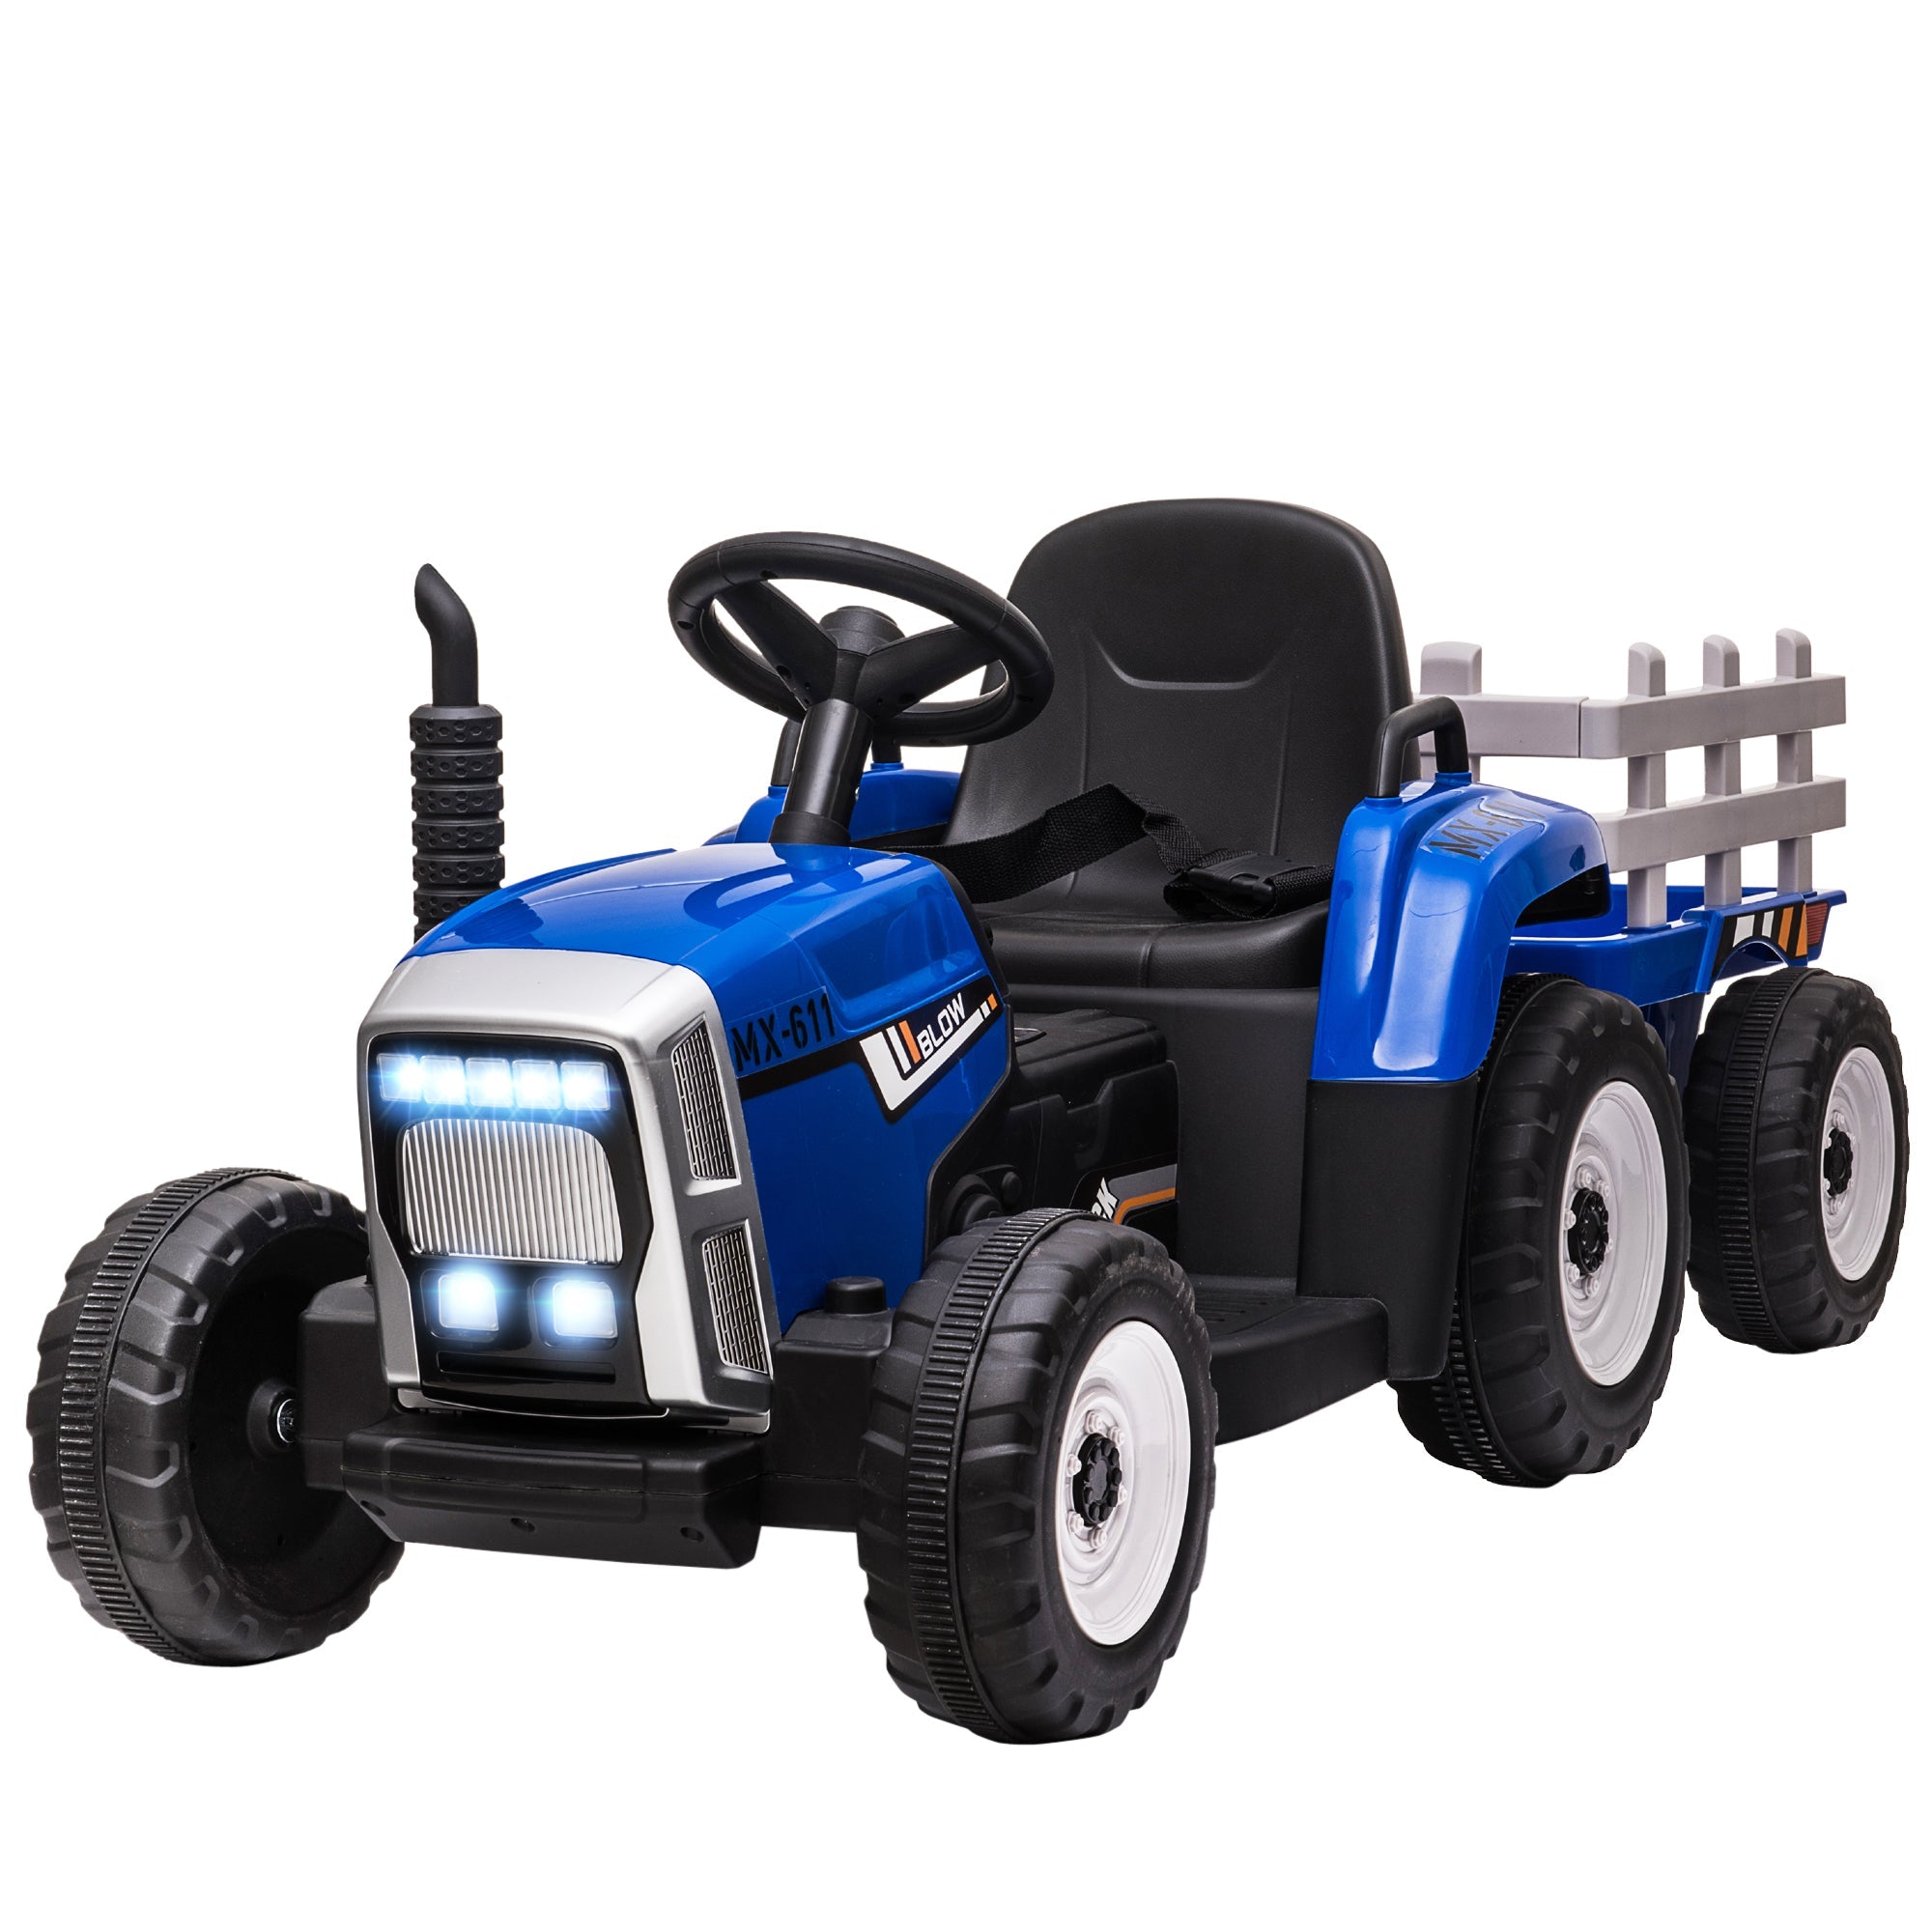 HOMCOM Electric Ride on Tractor w/ Detachable Trailer, 12V Kids Battery Powered Electric Car w/ Remote Control, Music Start up Sound, Blue - TovaHaus